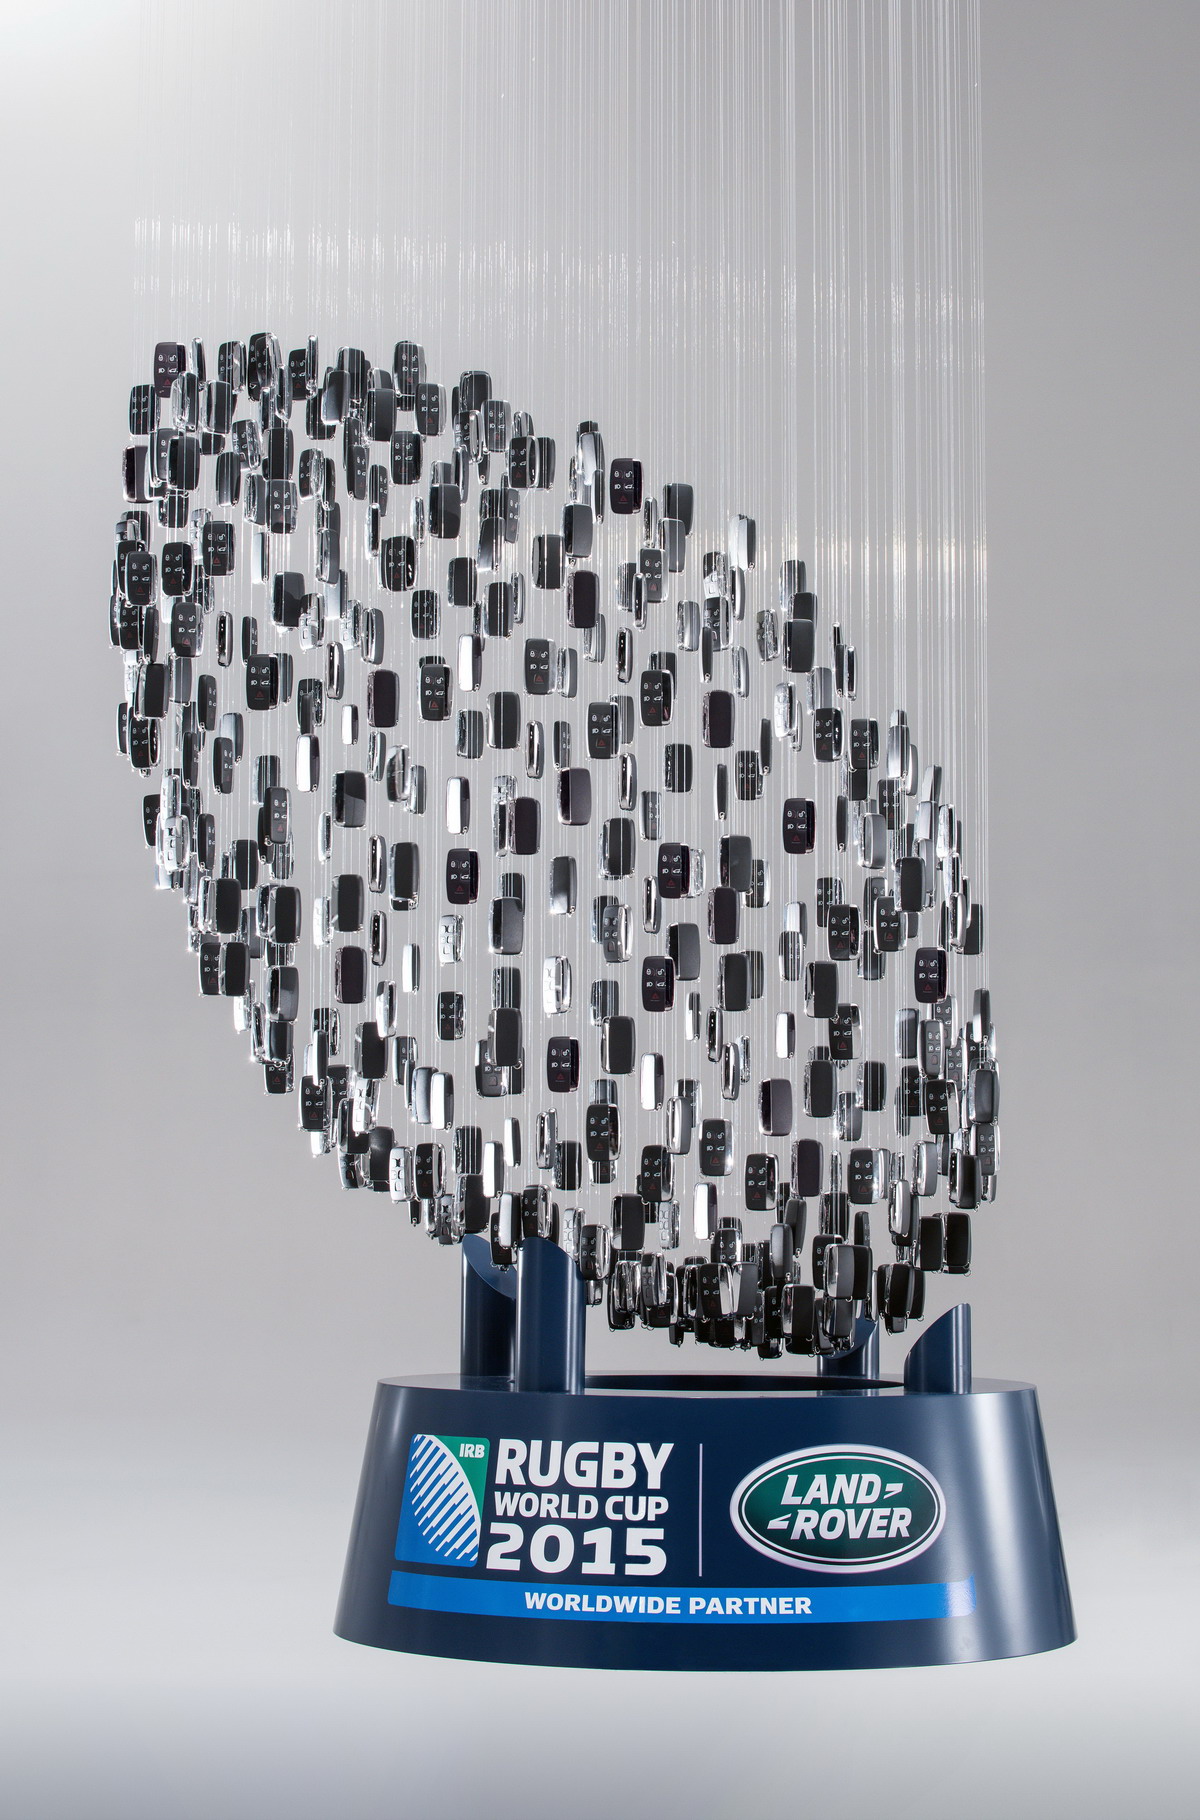 land-rover-unlocks-fleet-of-450-vehicles-to-support-rugby-world-cup-2015-jlr_1850_115531